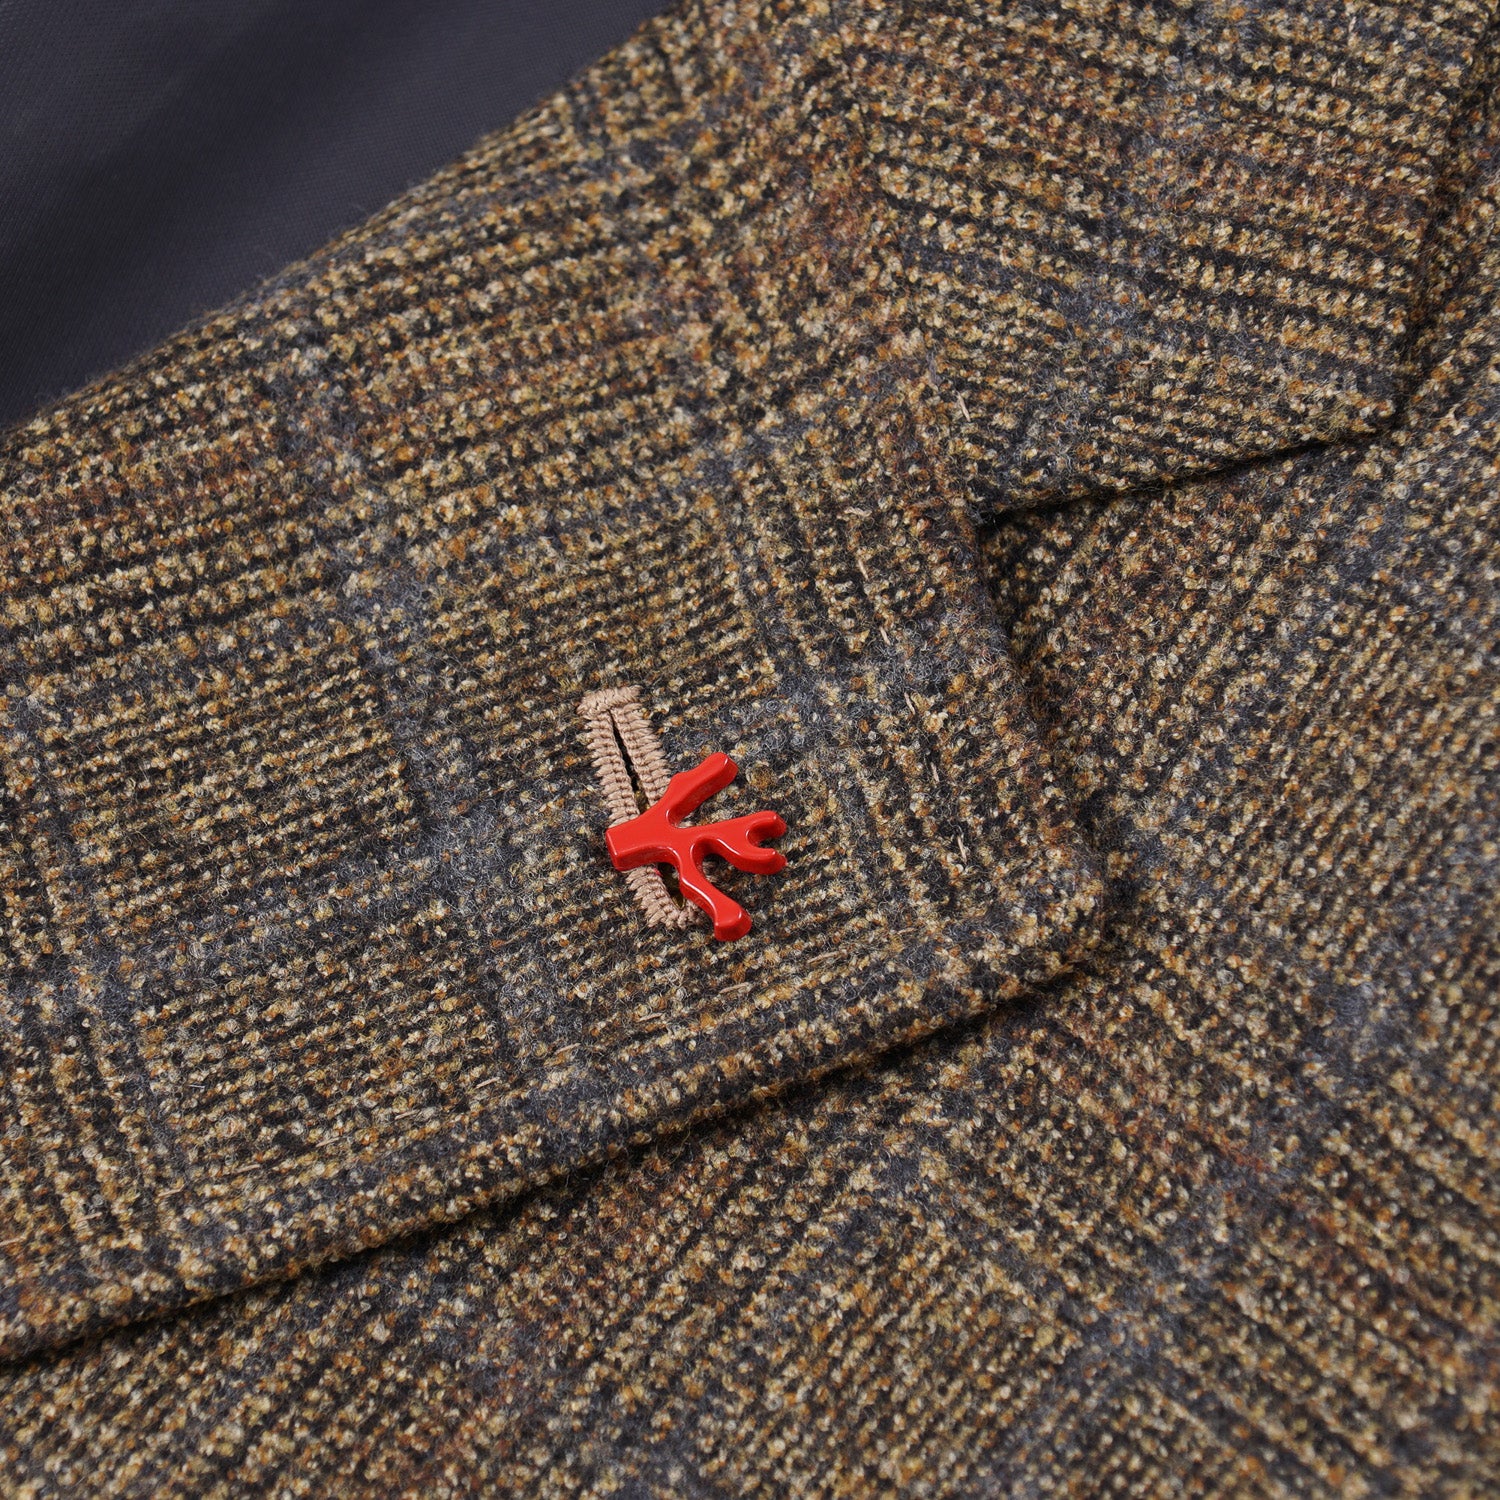 Isaia Slim-Fit Soft Flannel Wool Suit - Top Shelf Apparel